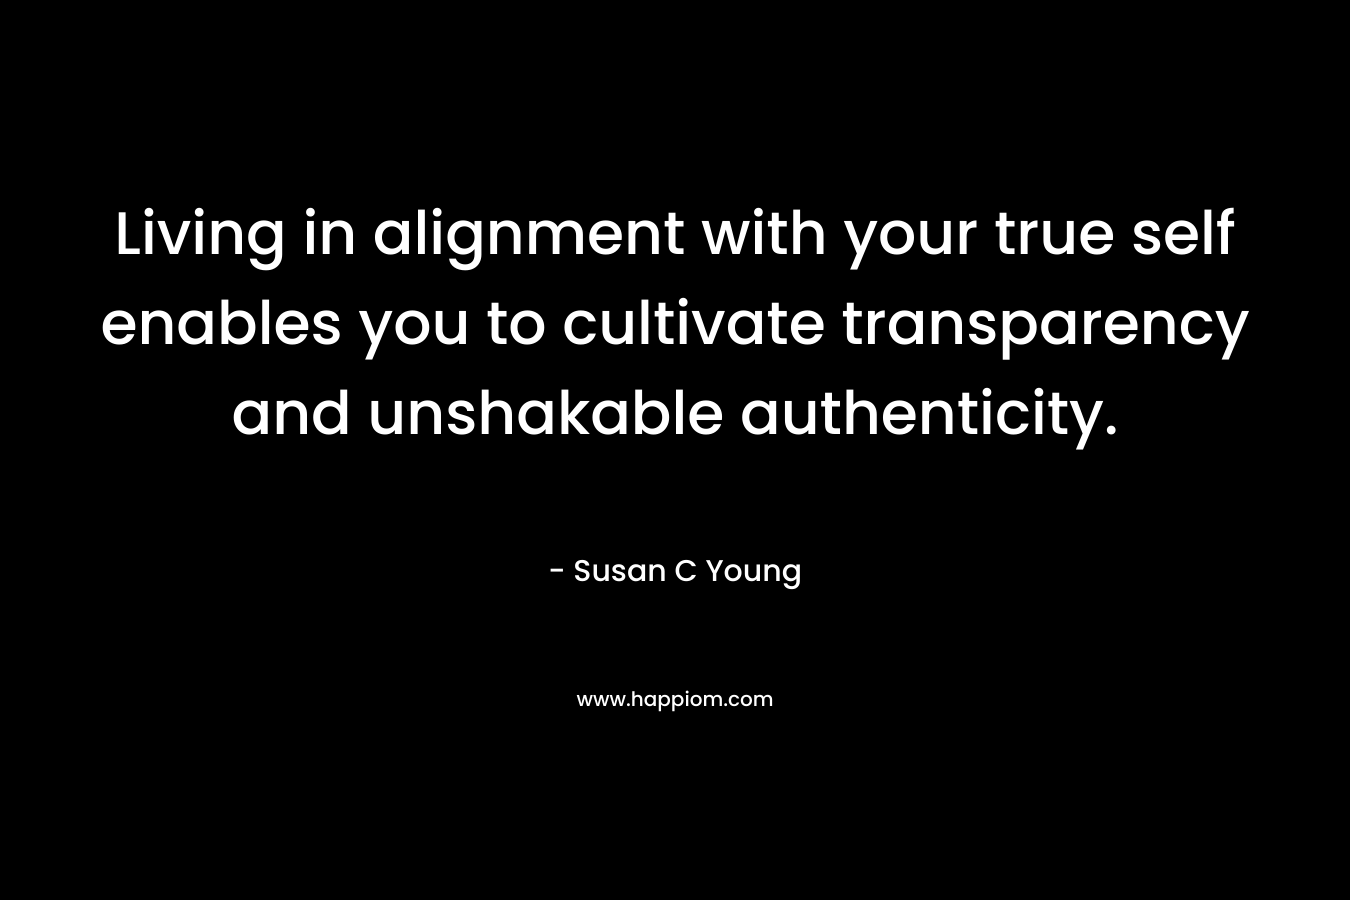 Living in alignment with your true self enables you to cultivate transparency and unshakable authenticity. – Susan C Young